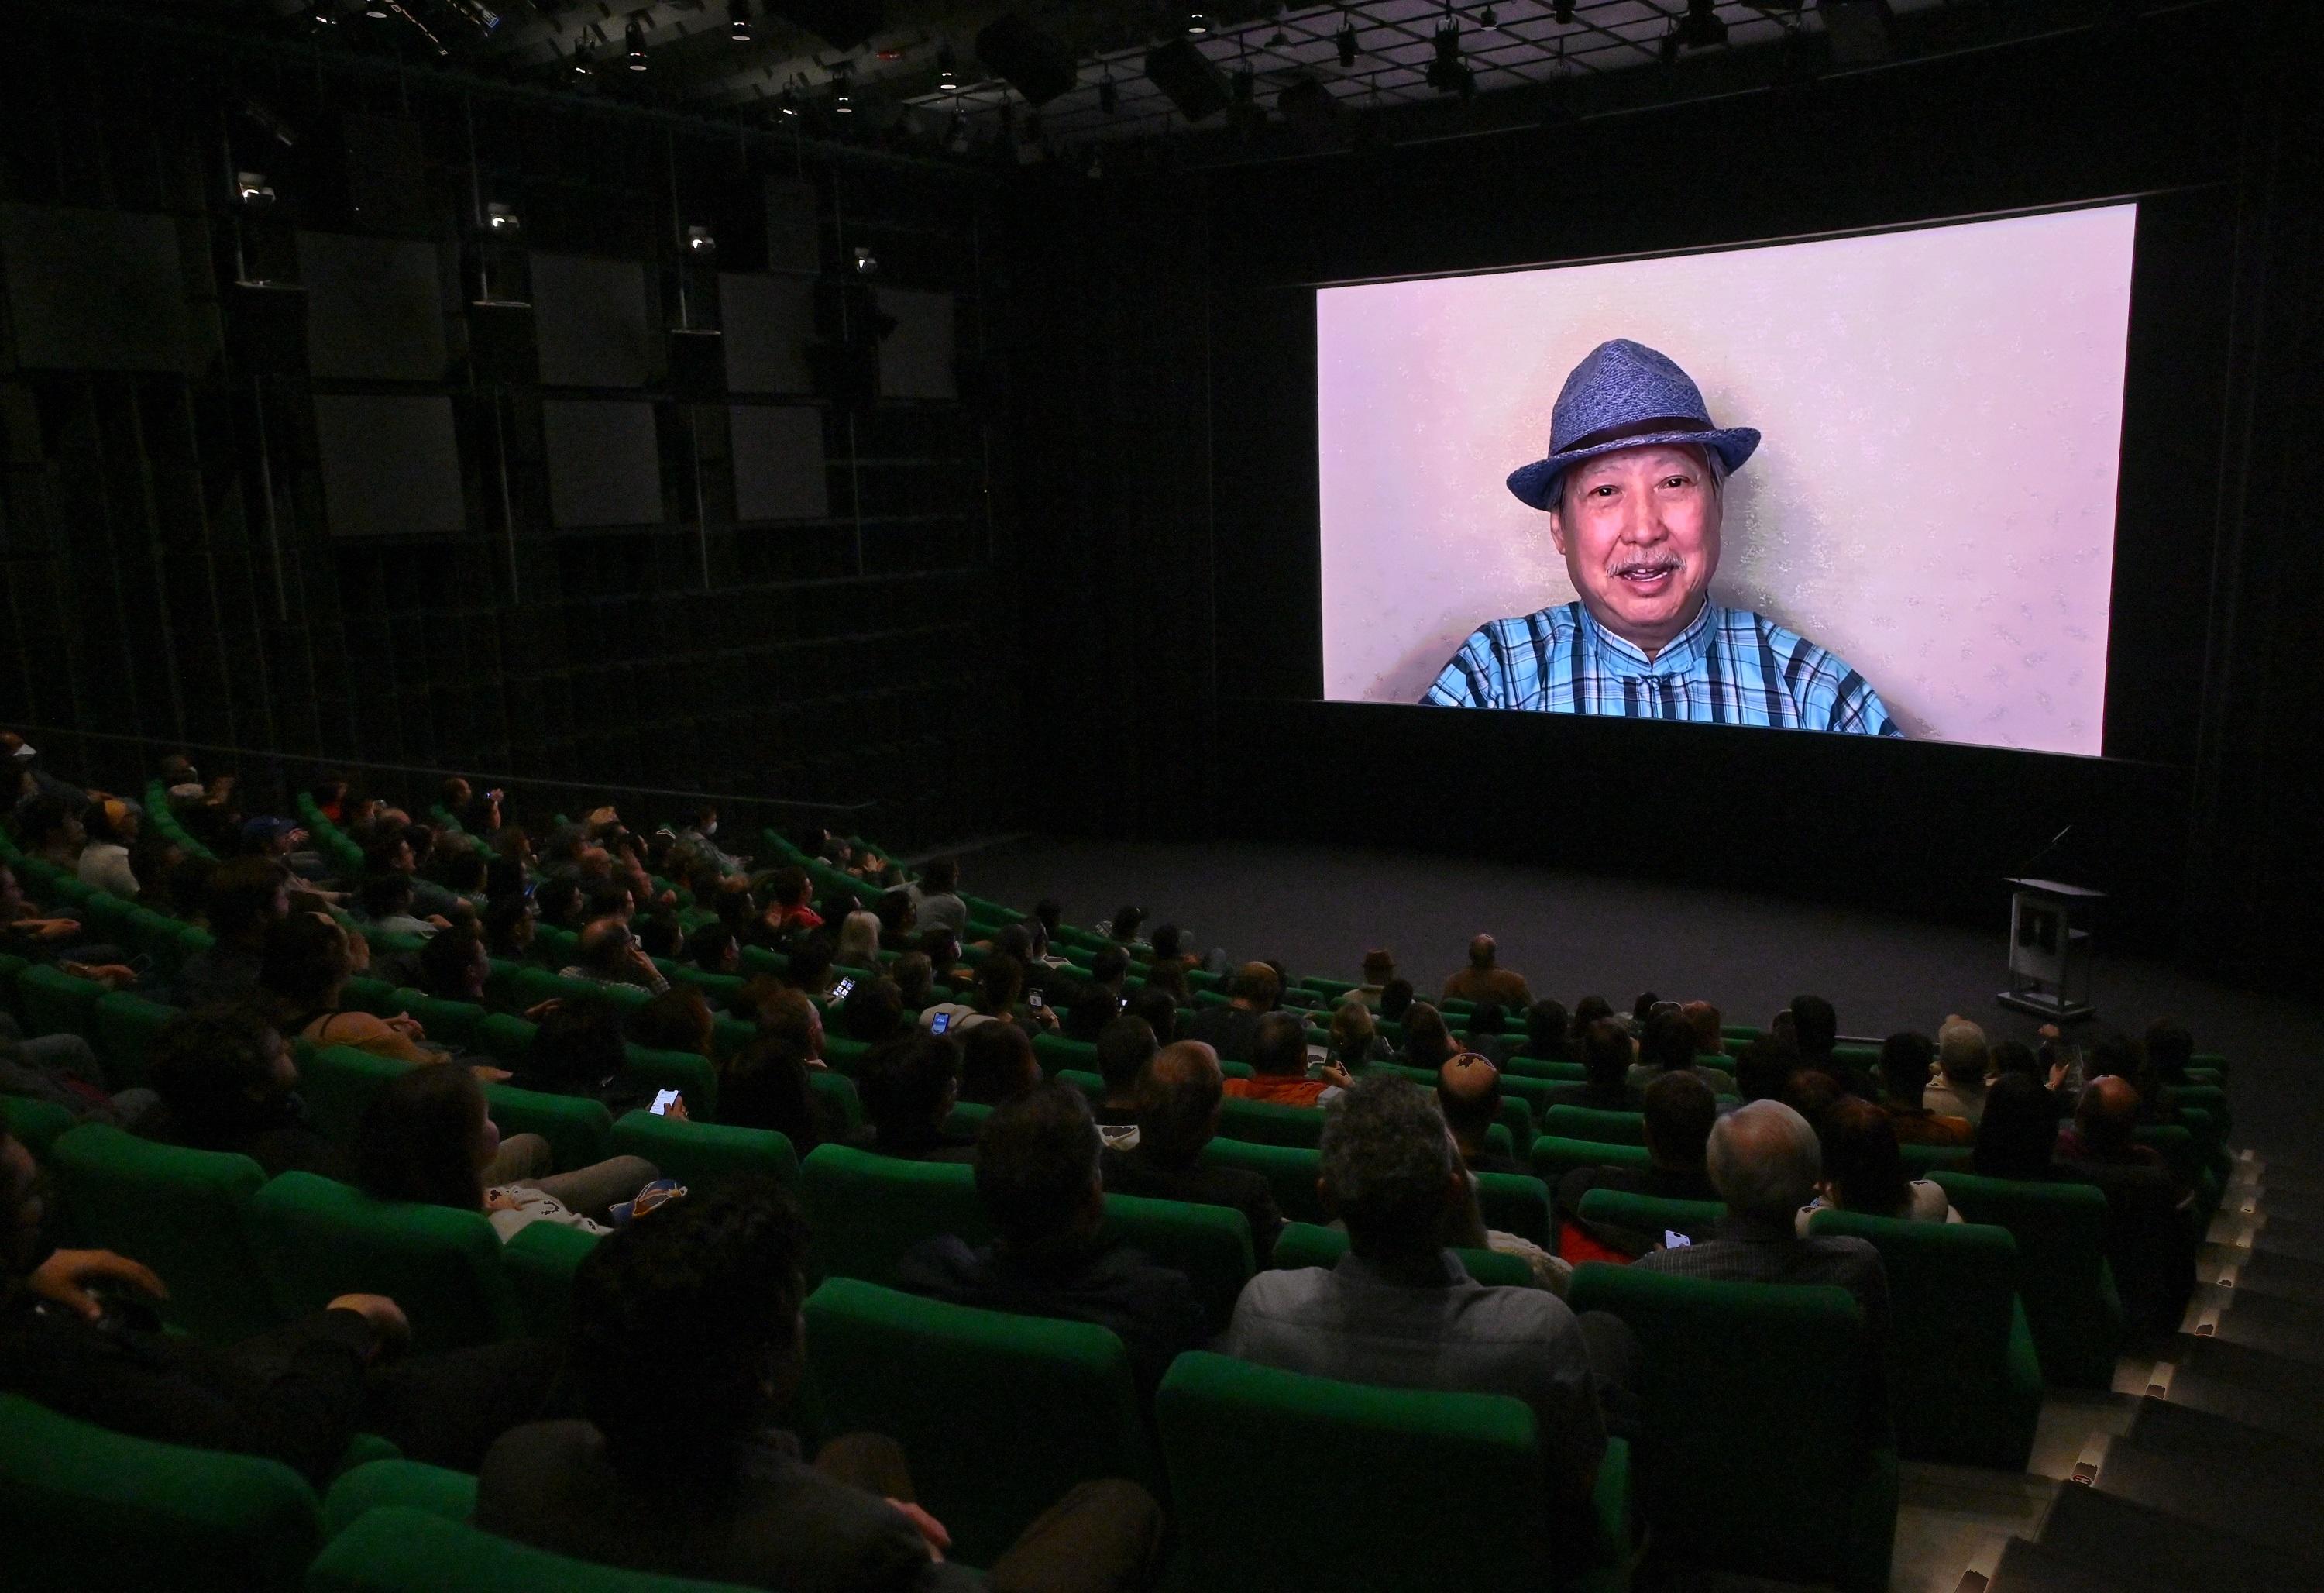 The Hong Kong Economic and Trade Office in San Francisco is supporting the “Sammo Hung: From Stuntman to Star” film series currently screening at the Academy Museum of Motion Pictures in Los Angeles from May 5 to 27 (Los Angeles time). Photo shows Hung delivering a pre-recorded speech at the opening screening of “The Millionaires' Express” with “Pedicab Driver” on May 5 (Los Angeles time).